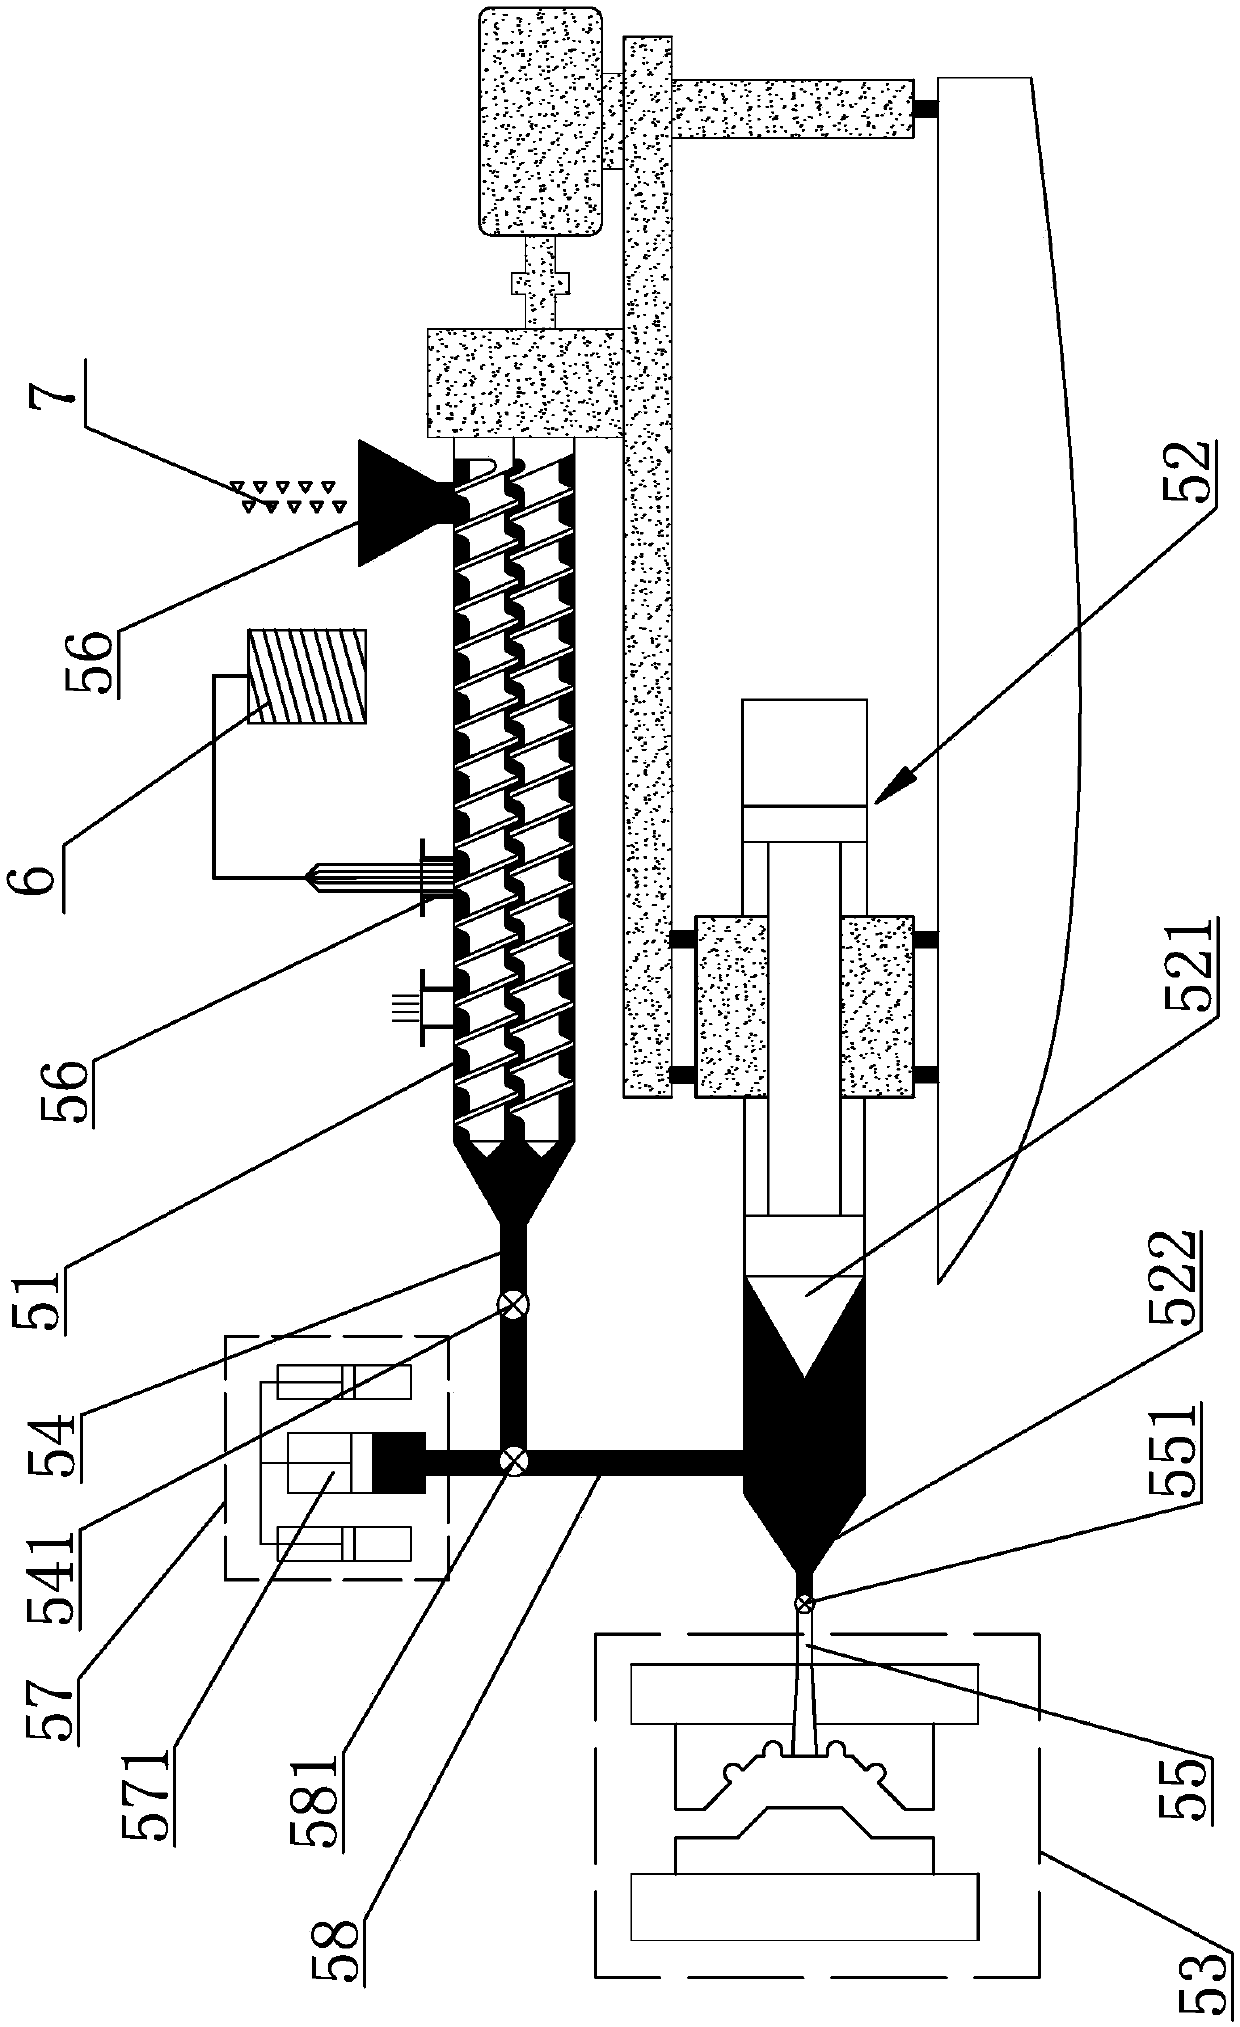 Production system of fiber reinforced composite product